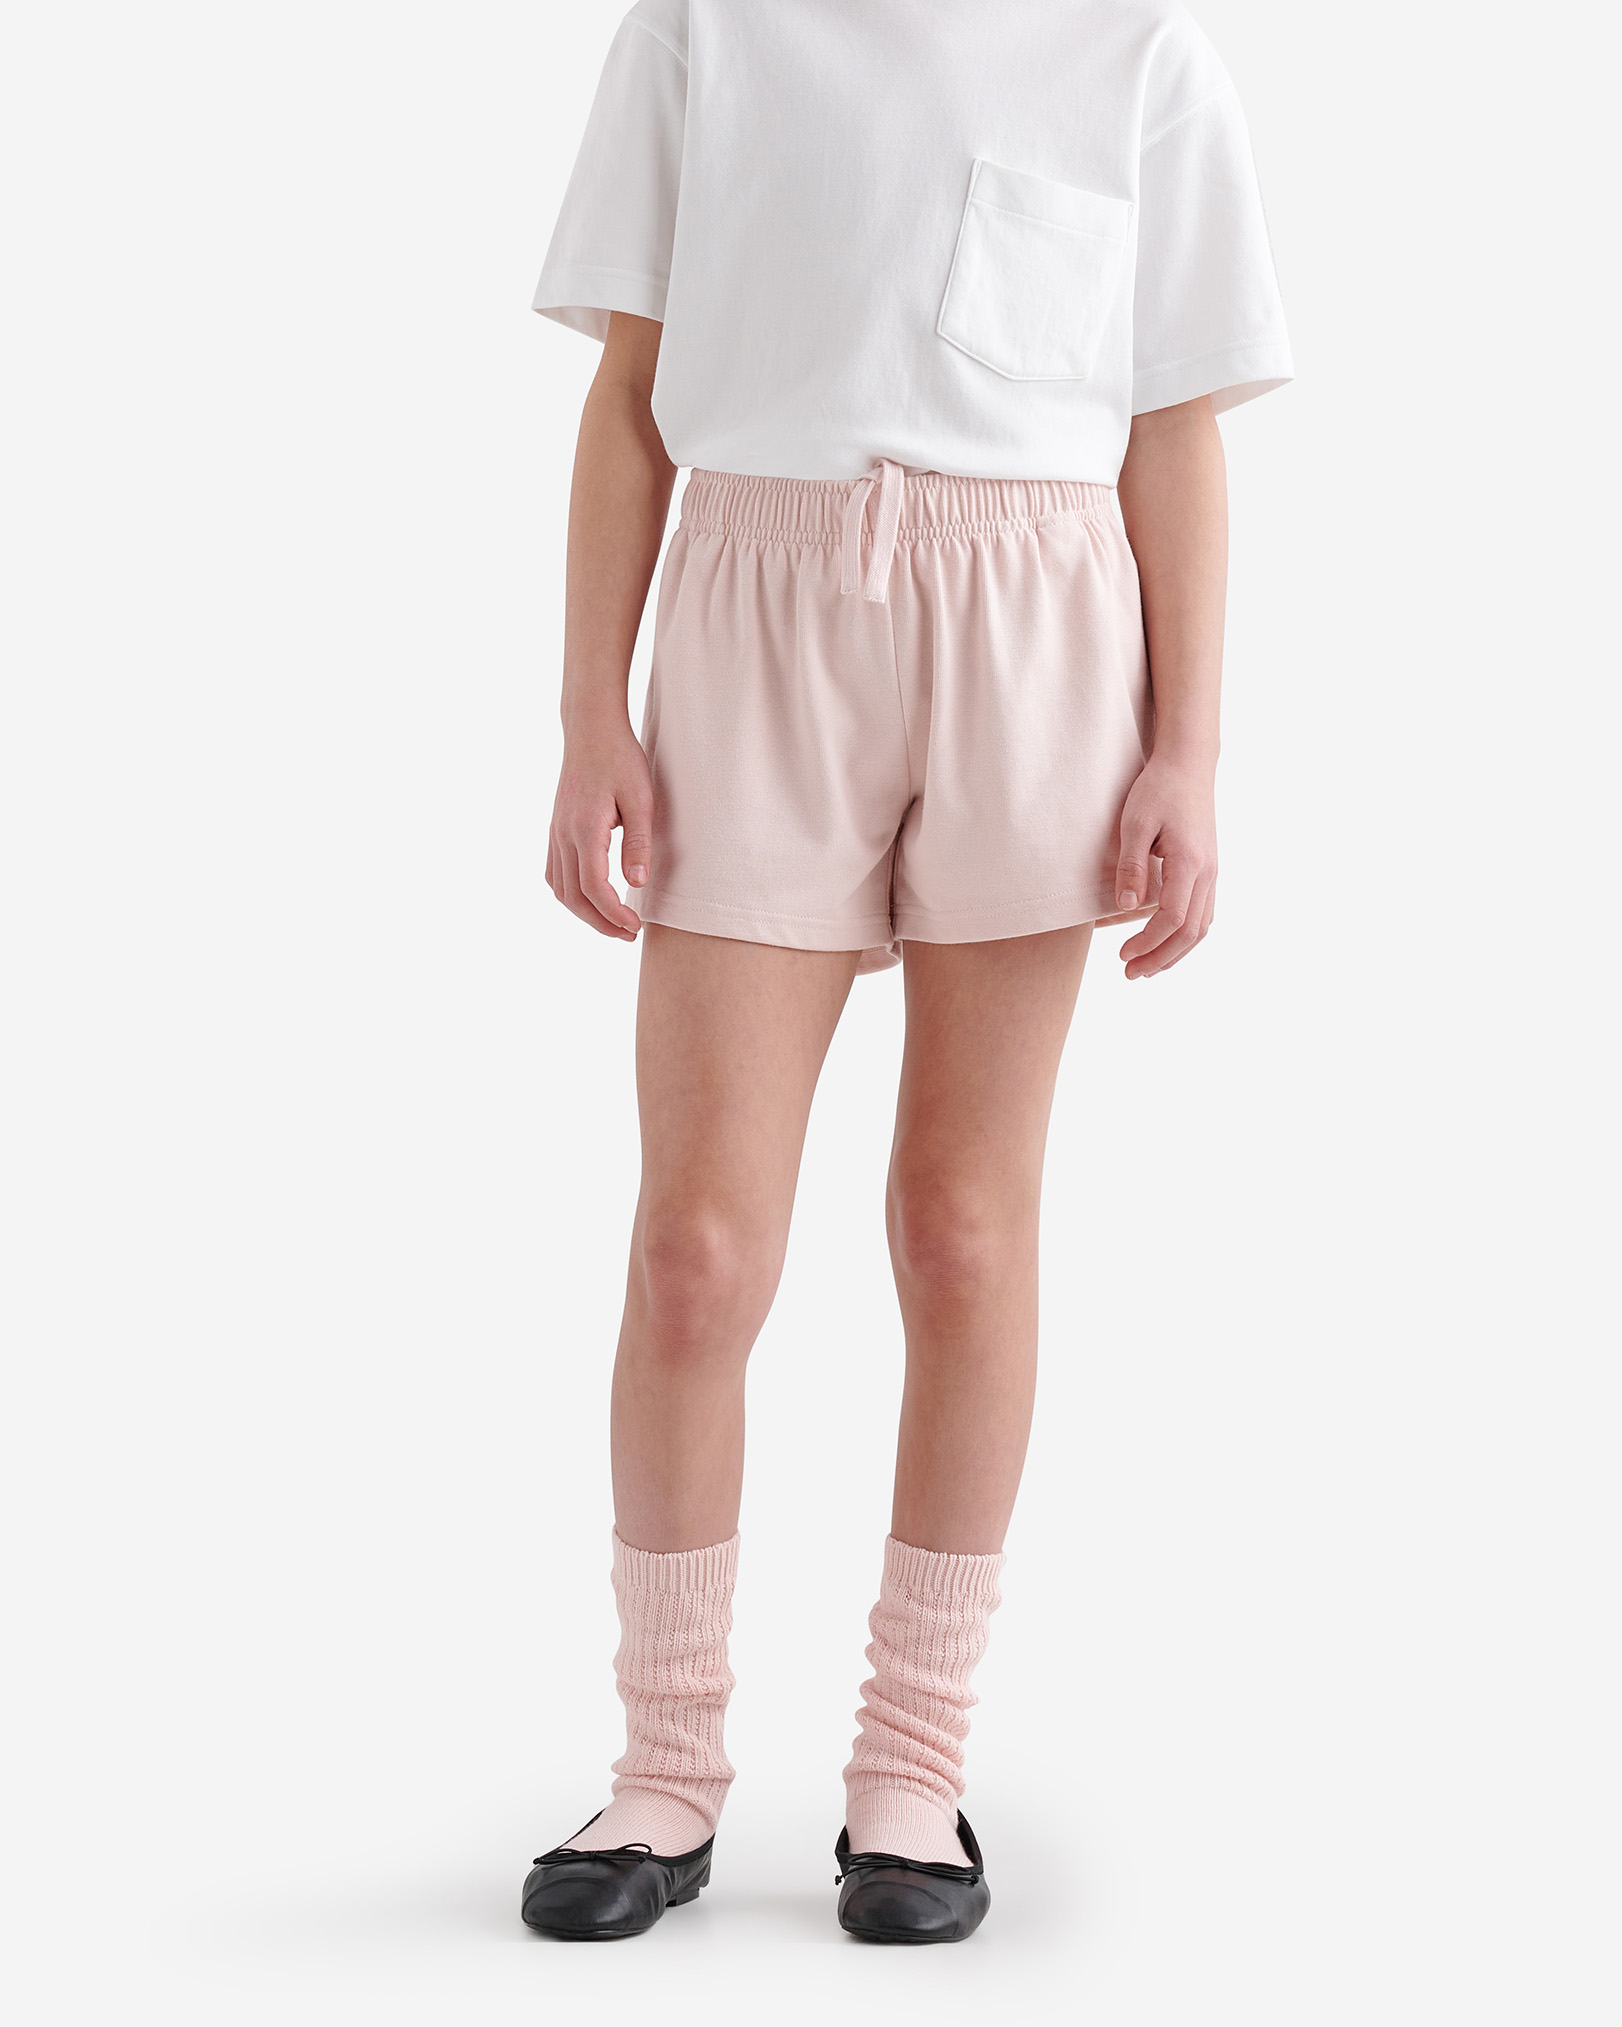 Roots Girl's Warm-Up Tap Short in Pearl Pink